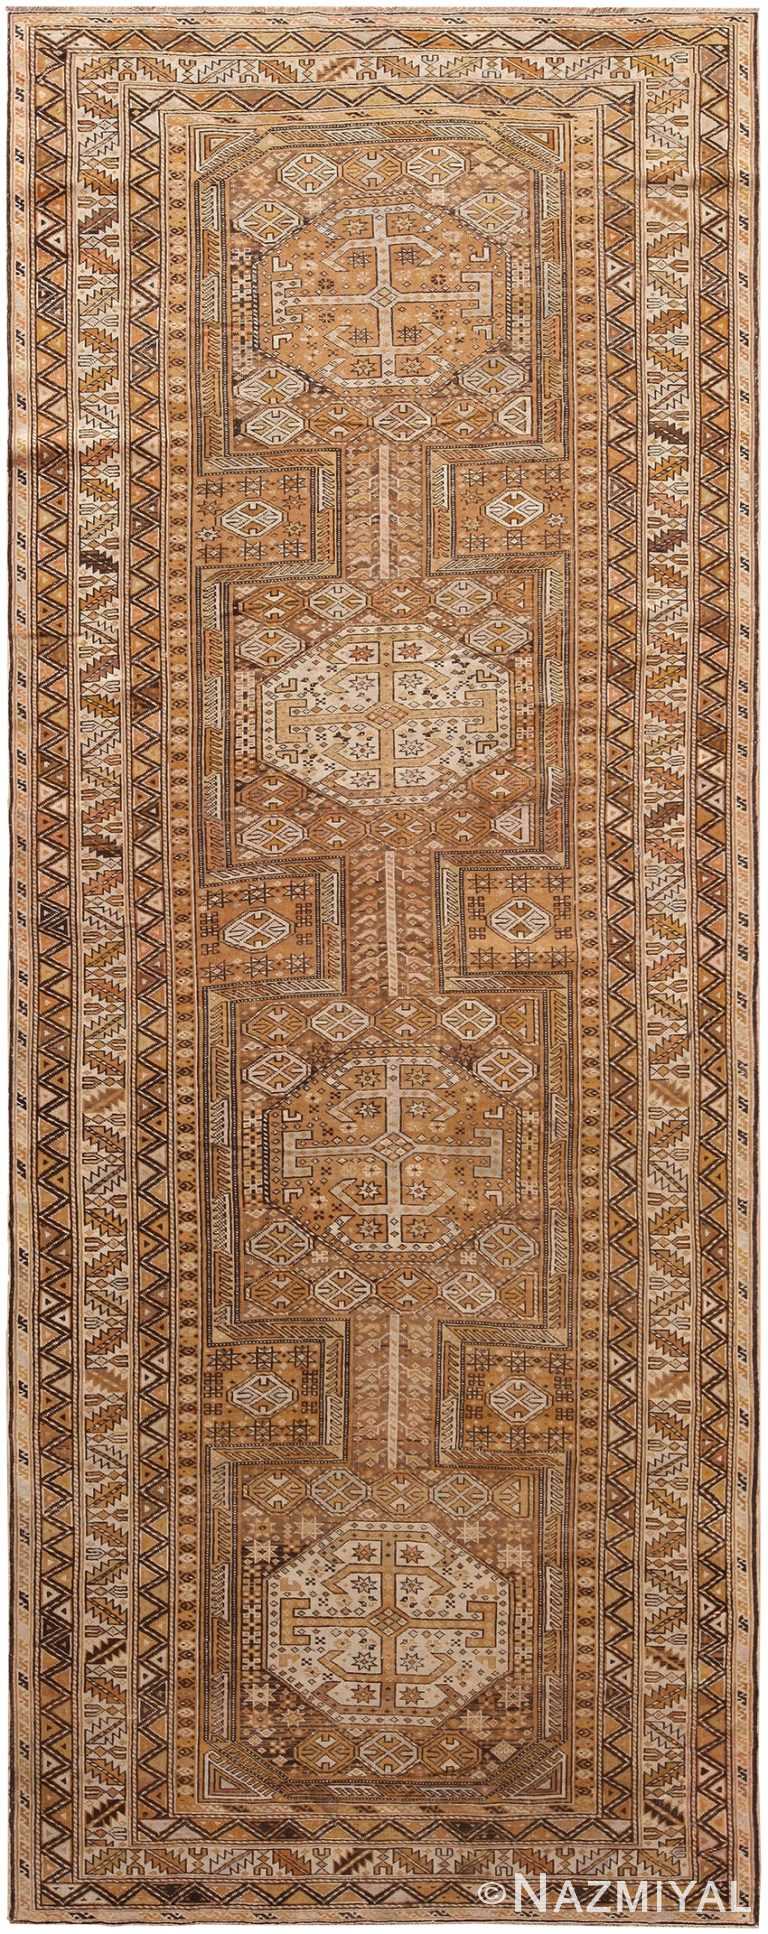 Gallery Size Tribal Antique Caucasian Shirvan Rug 70649 by Nazmiyal NYC